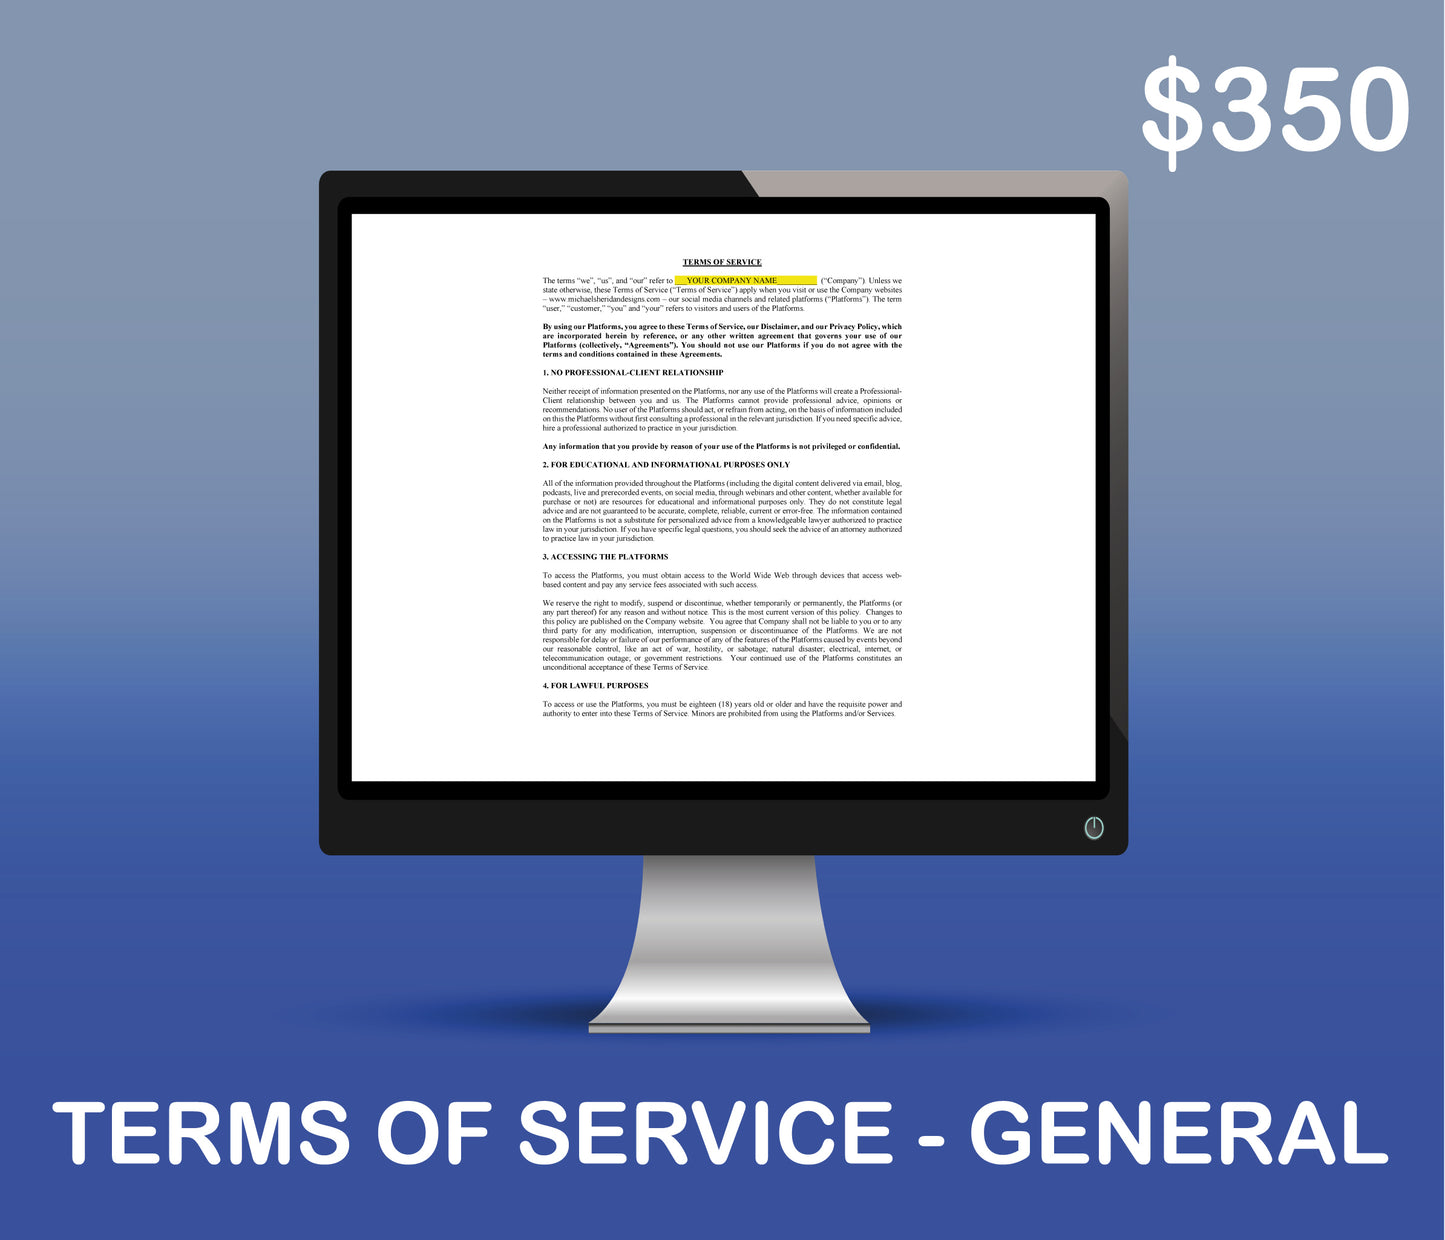 Terms of Service - General